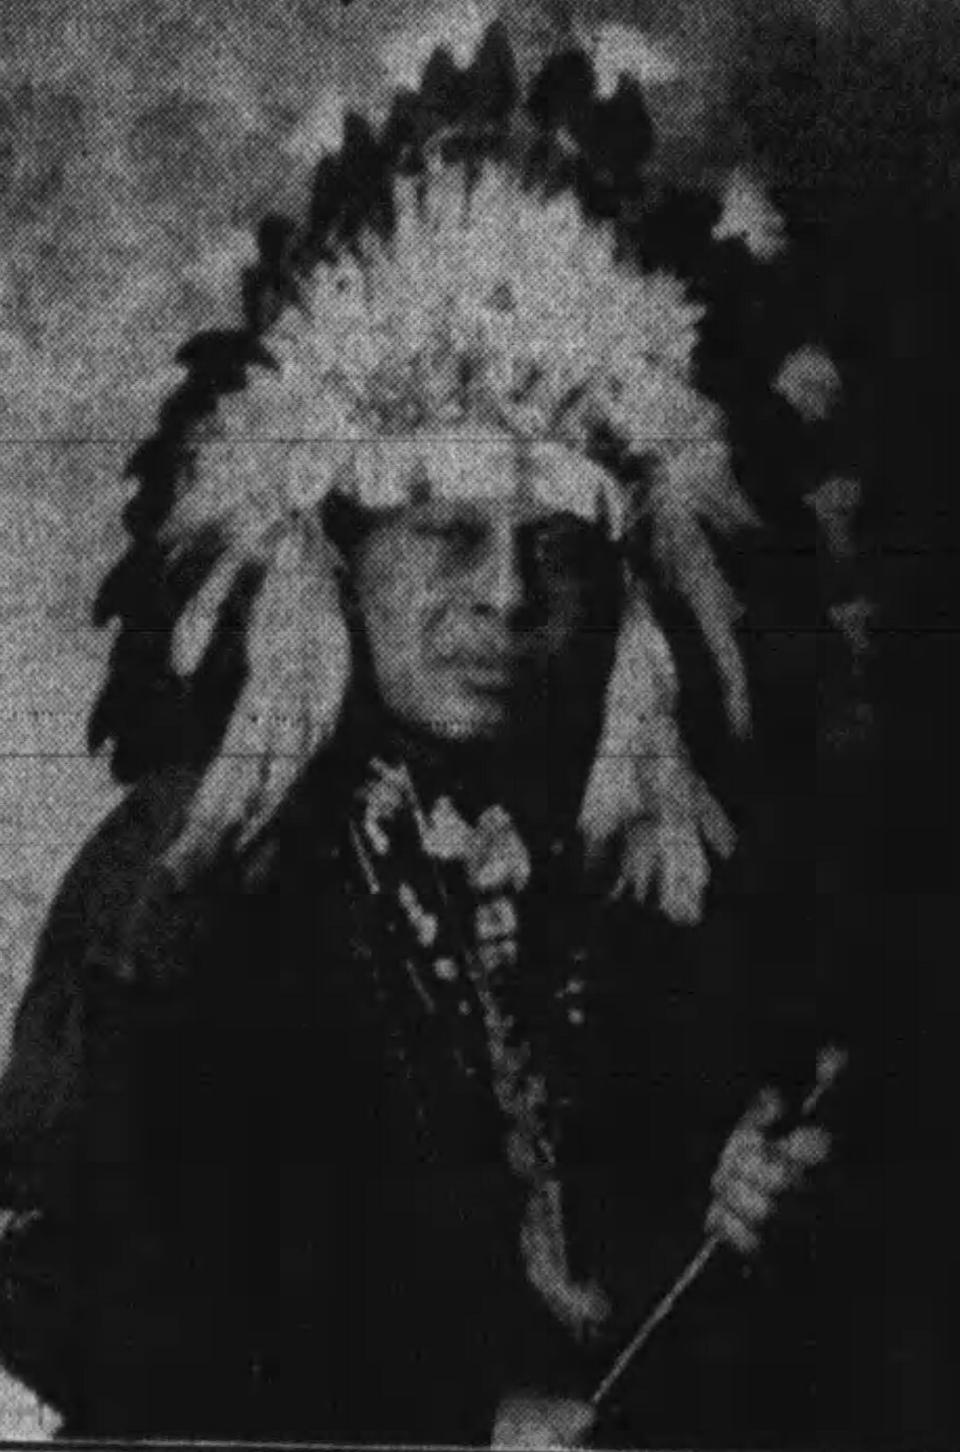 Chief Big Buffalo appears in headdress in 1935 while performing with the Jack Case Rodeo in New Jersey.